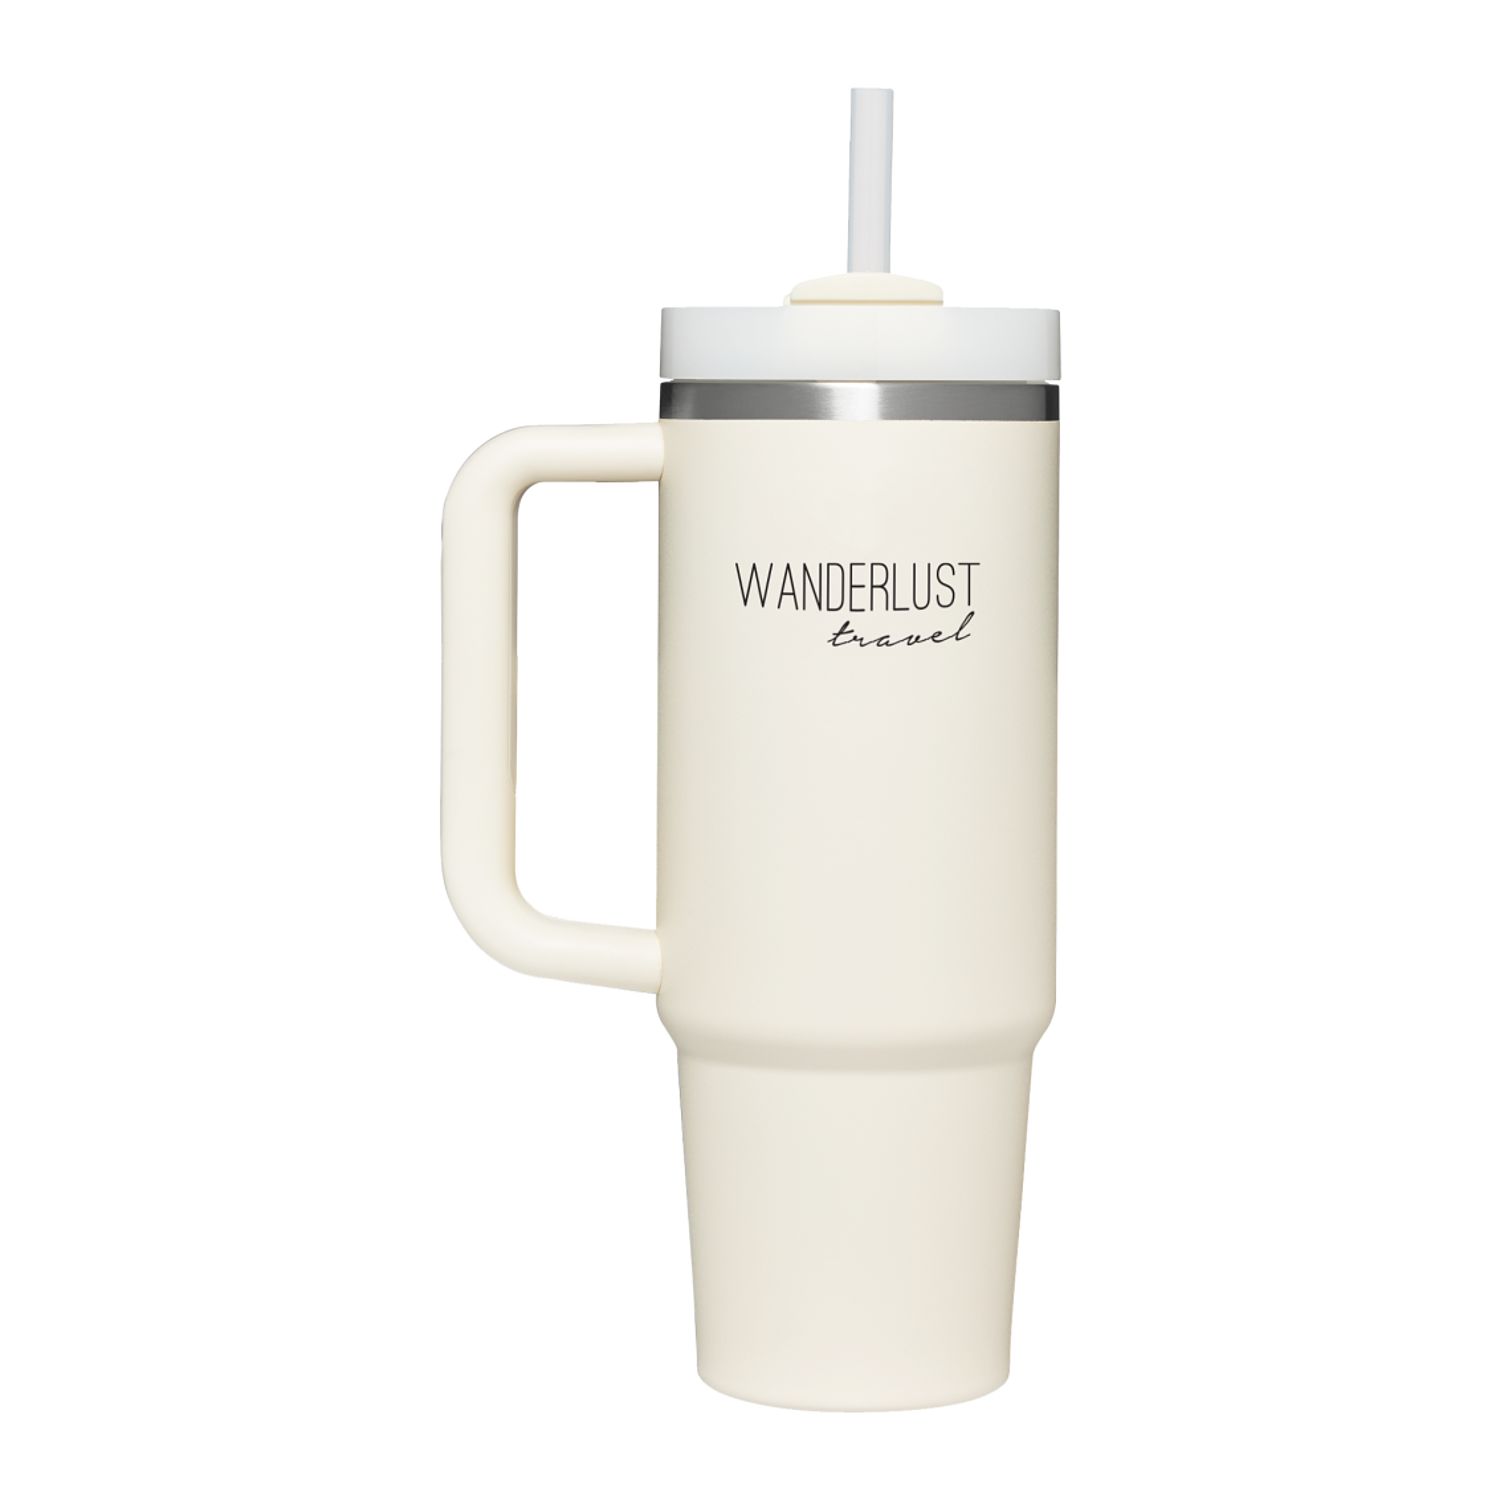 Stanley Quencher H2.0 FlowState Tumbler | 30 oz, Charcoal